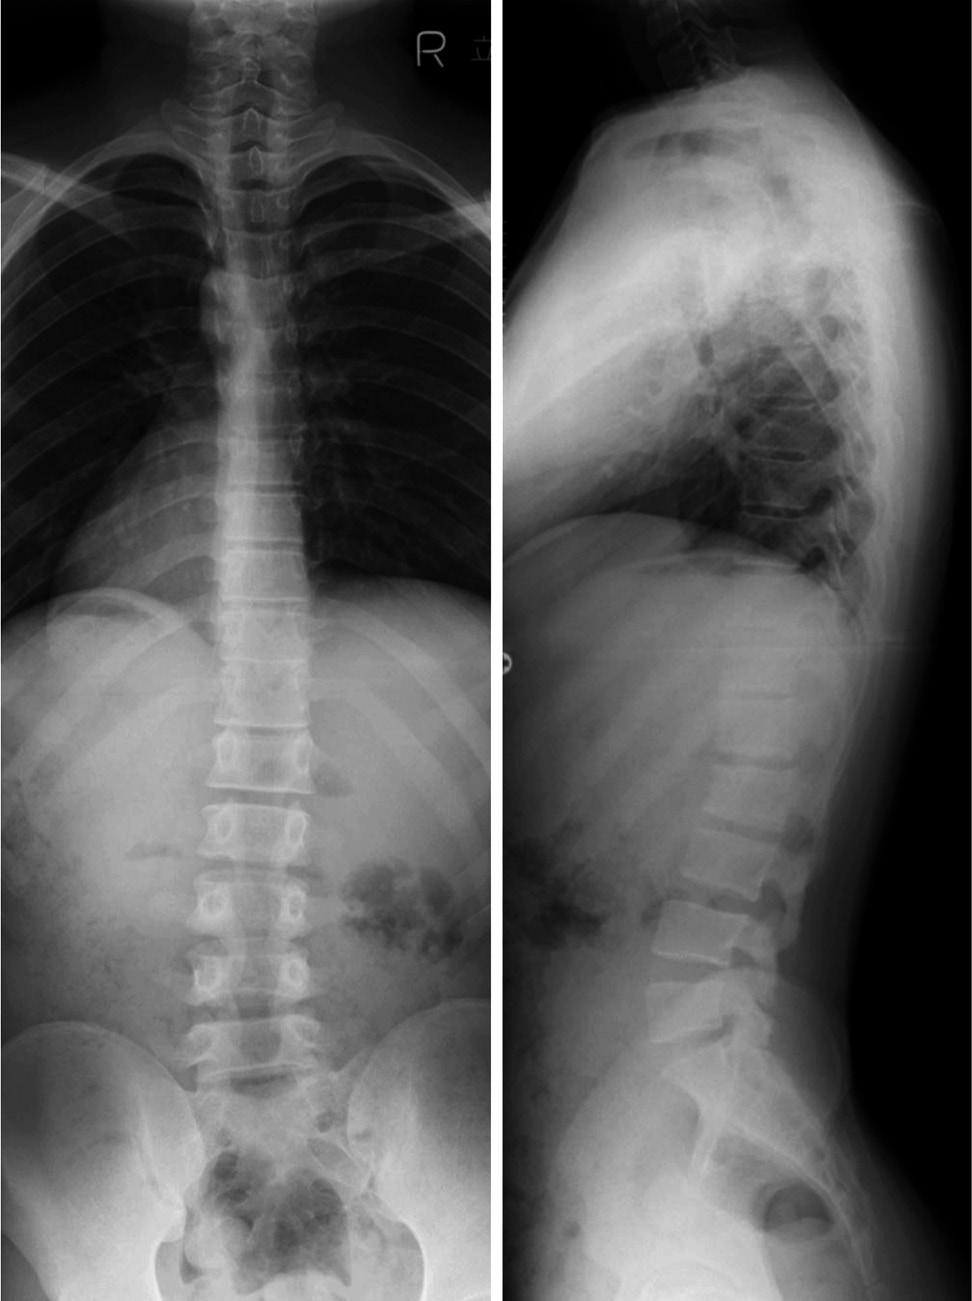 The 5-year-old boy in the current report was the youngest of patients in the earlier reports. Complete resection of myxopapillary ependymomas is associated with excellent long-term prognosis.